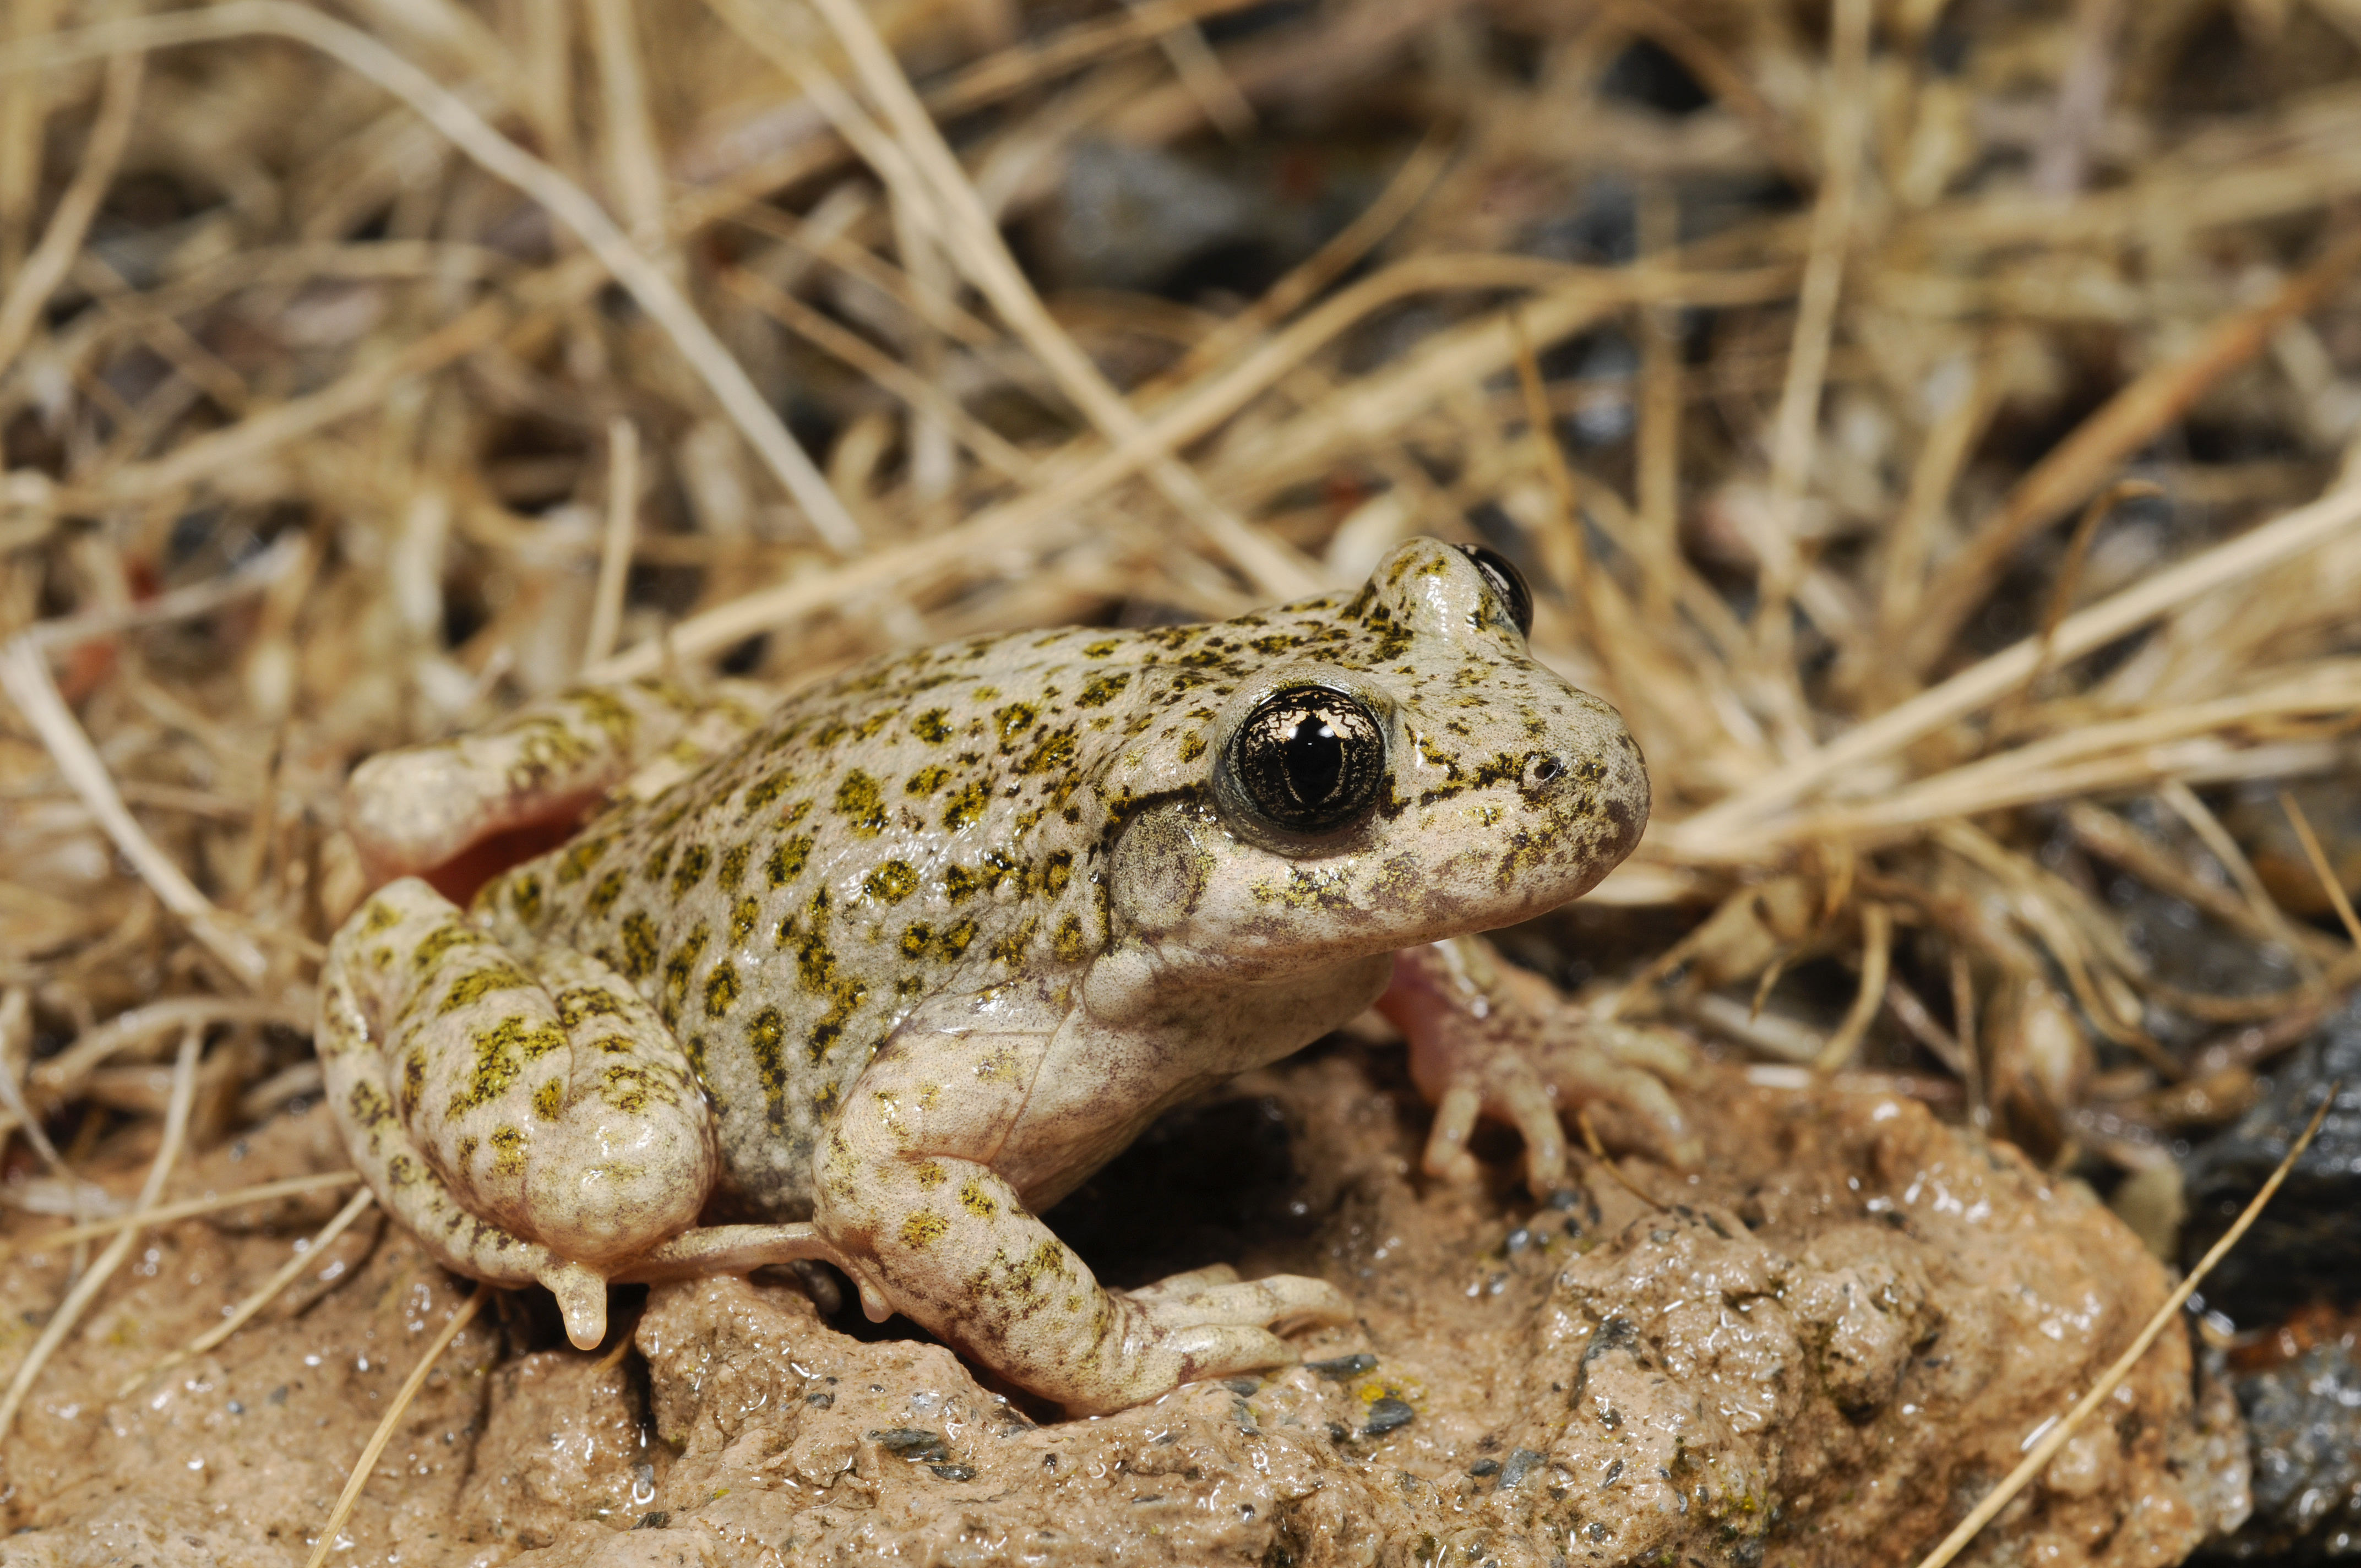 Image of Betic midwife toad